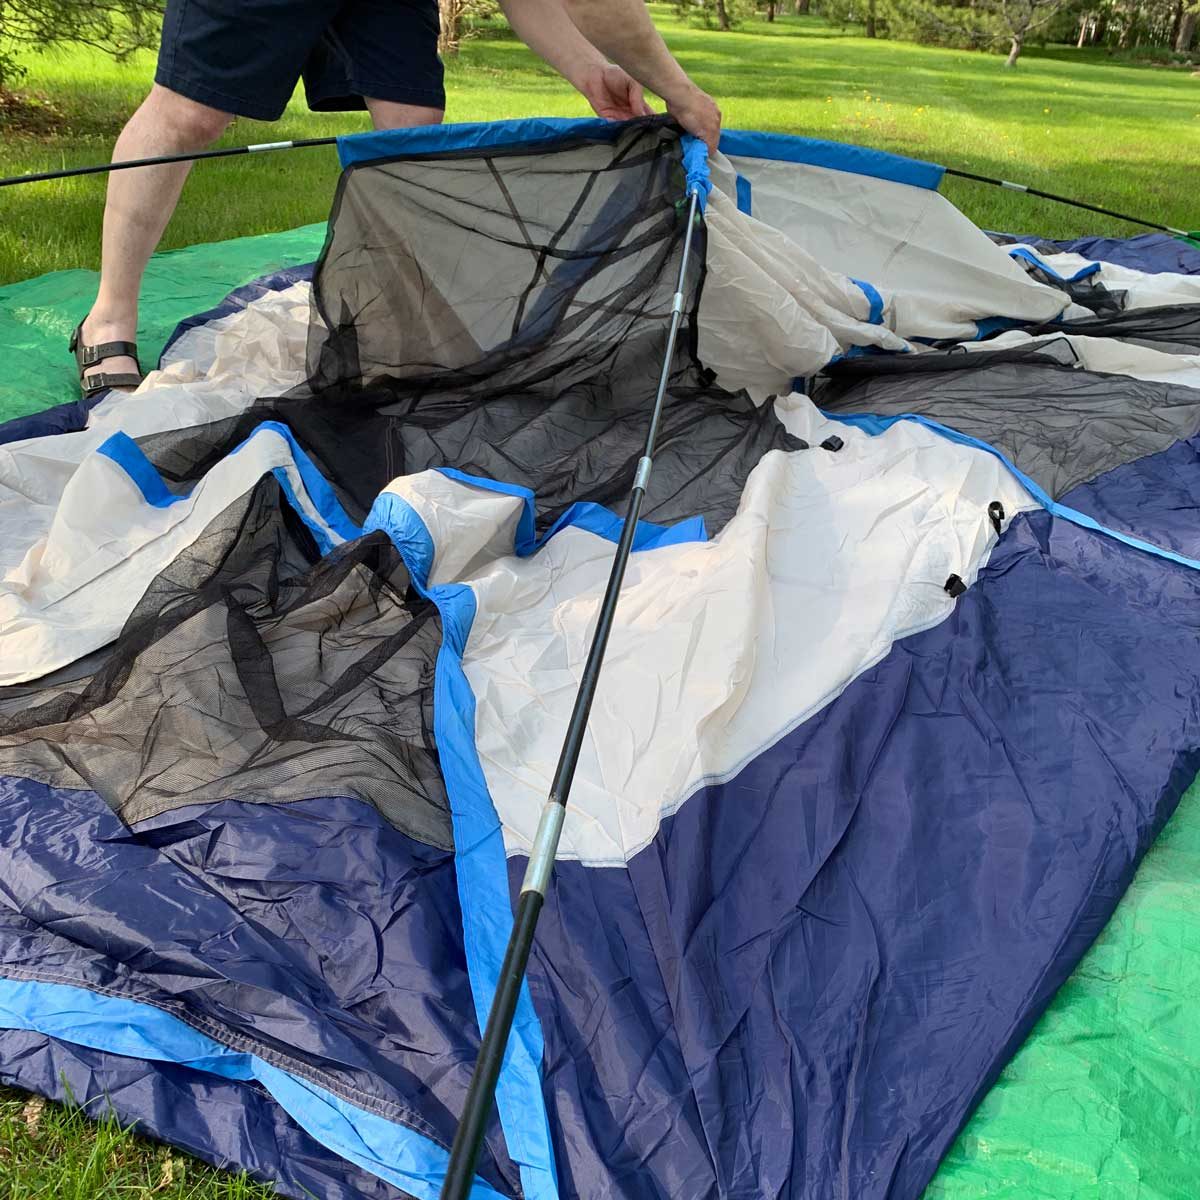 How to Set Up/Pitch a Tent